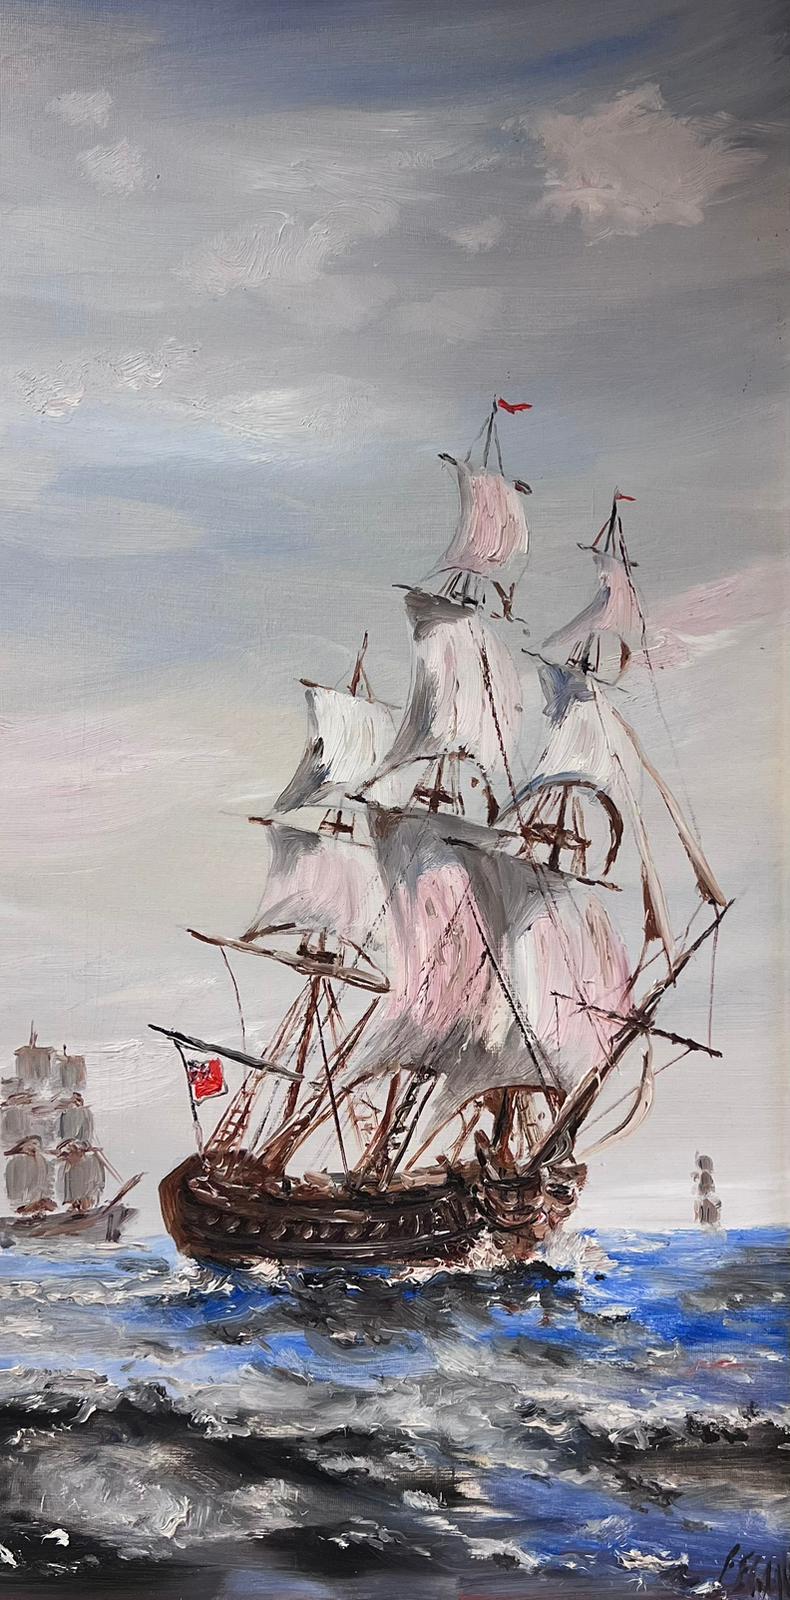 Tall Ship at Sea
by F. C. Fagan, British 20th century
signed oil on board, framed
artists label verso
framed: 35 x 23 inches
board : 30 x 17 inches
provenance: private collection
condition: very good and sound condition 